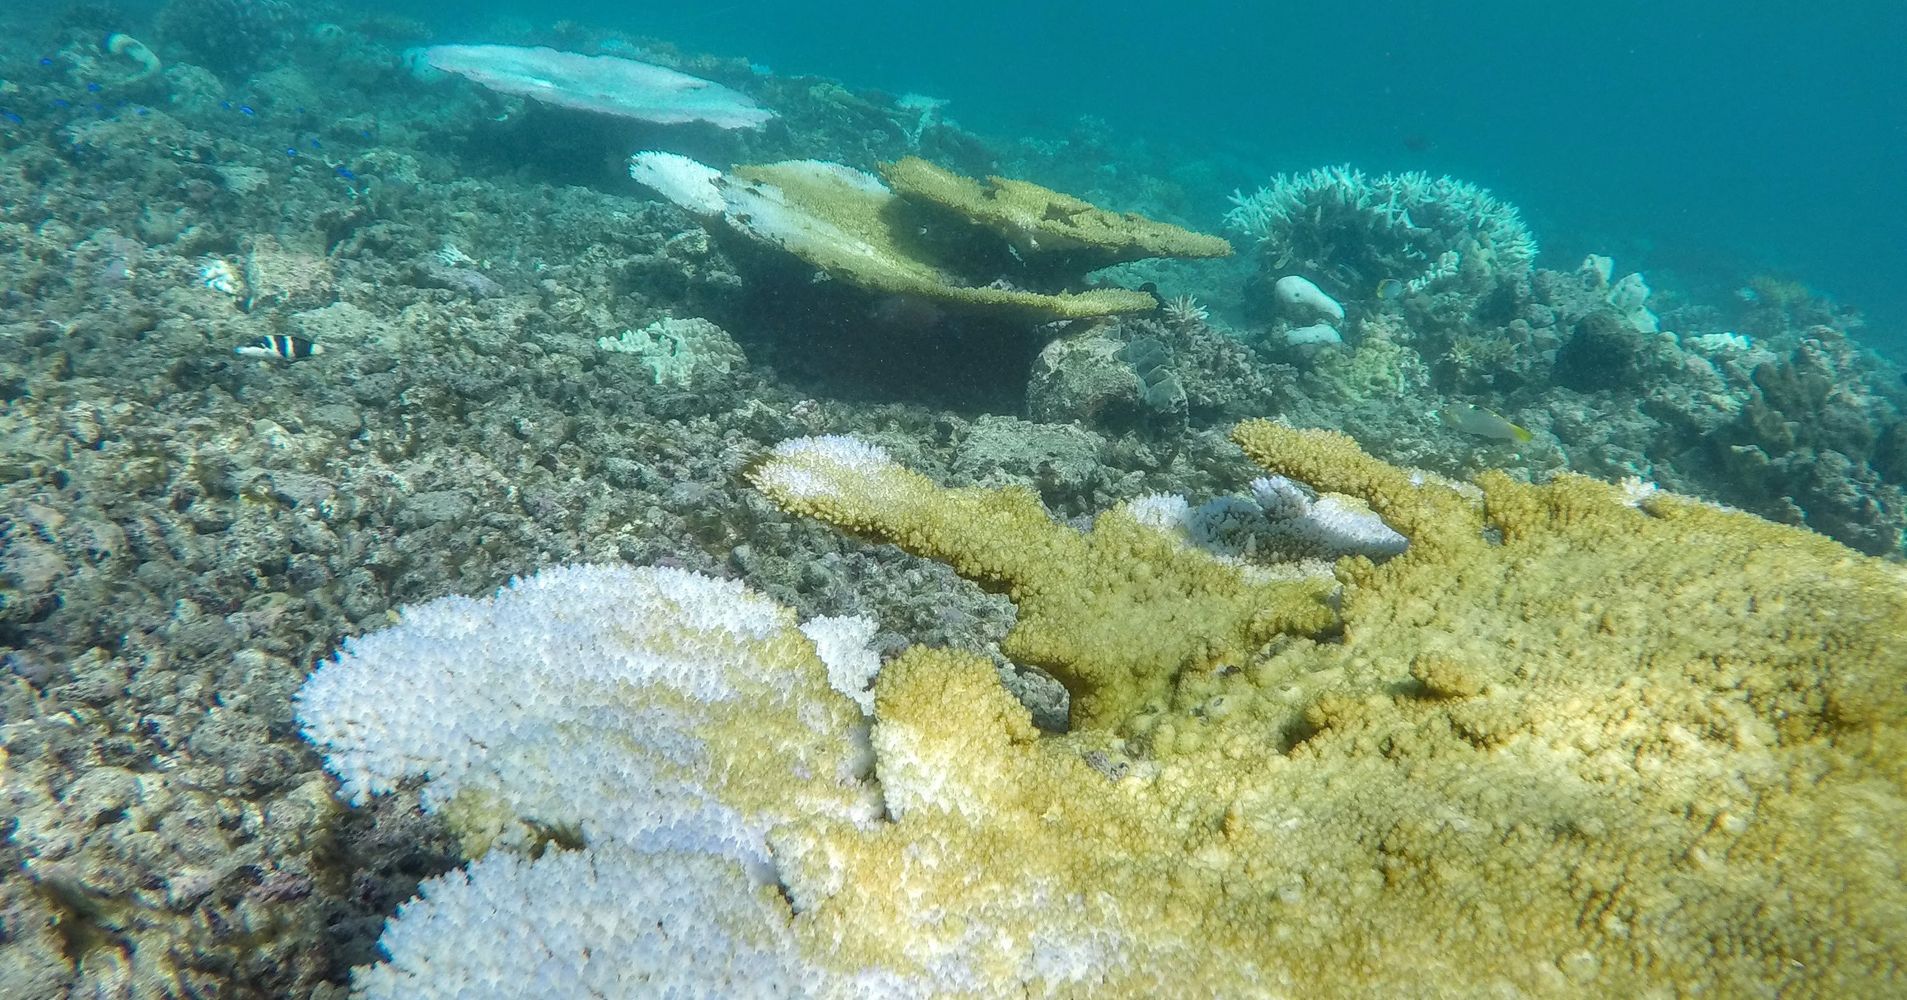 More Than A Third Of The Coral Is Dead In Parts Of The Great Barrier ...